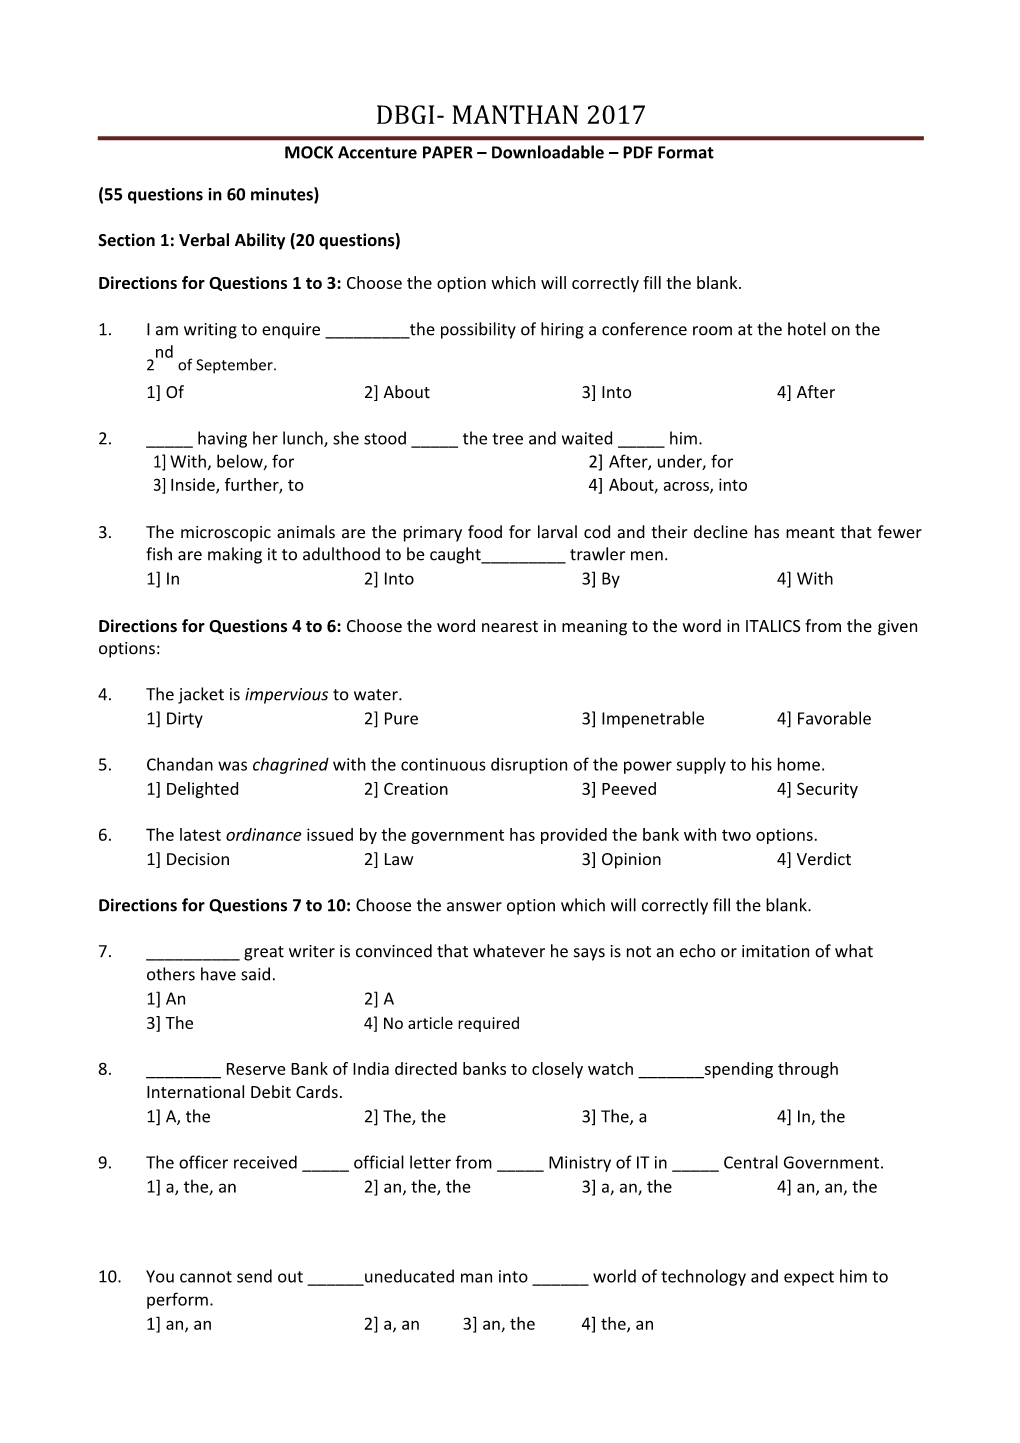 MOCK Accenture PAPER Downloadable PDF Format (55 Questions in 60 Minutes)